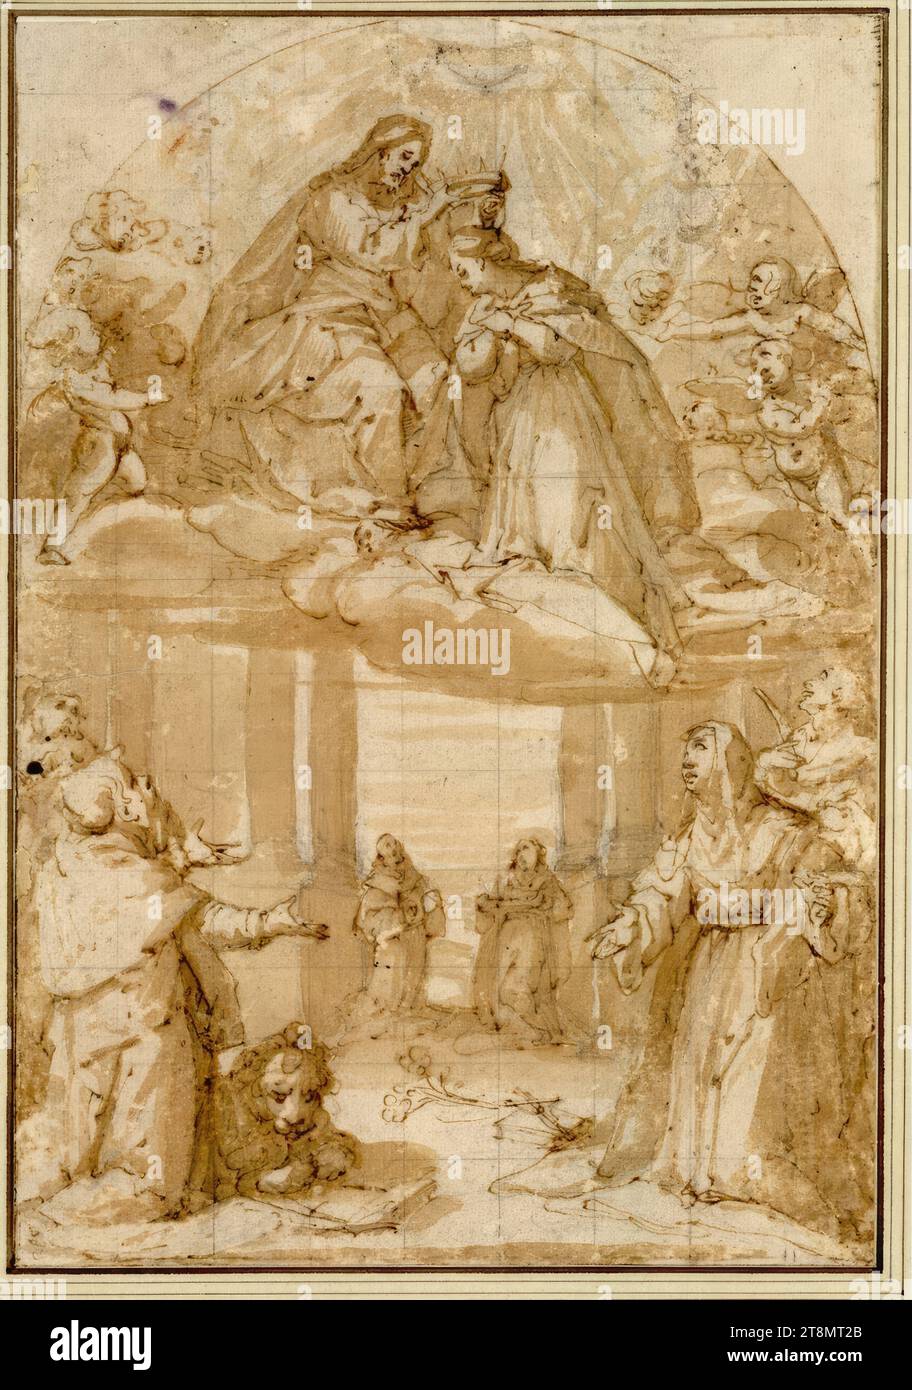 Coronation of the Virgin Mary on Clouds; below six adoring saints in front of a column architecture, Federico Zuccari (Sant' Angelo in Vado 1540/41 - 1609 Ancona), drawing, chalk; Feather; washed; Chalk squaring, 32.7 x 20 cm, l.l. Duke Albert of Saxe-Teschen Stock Photo